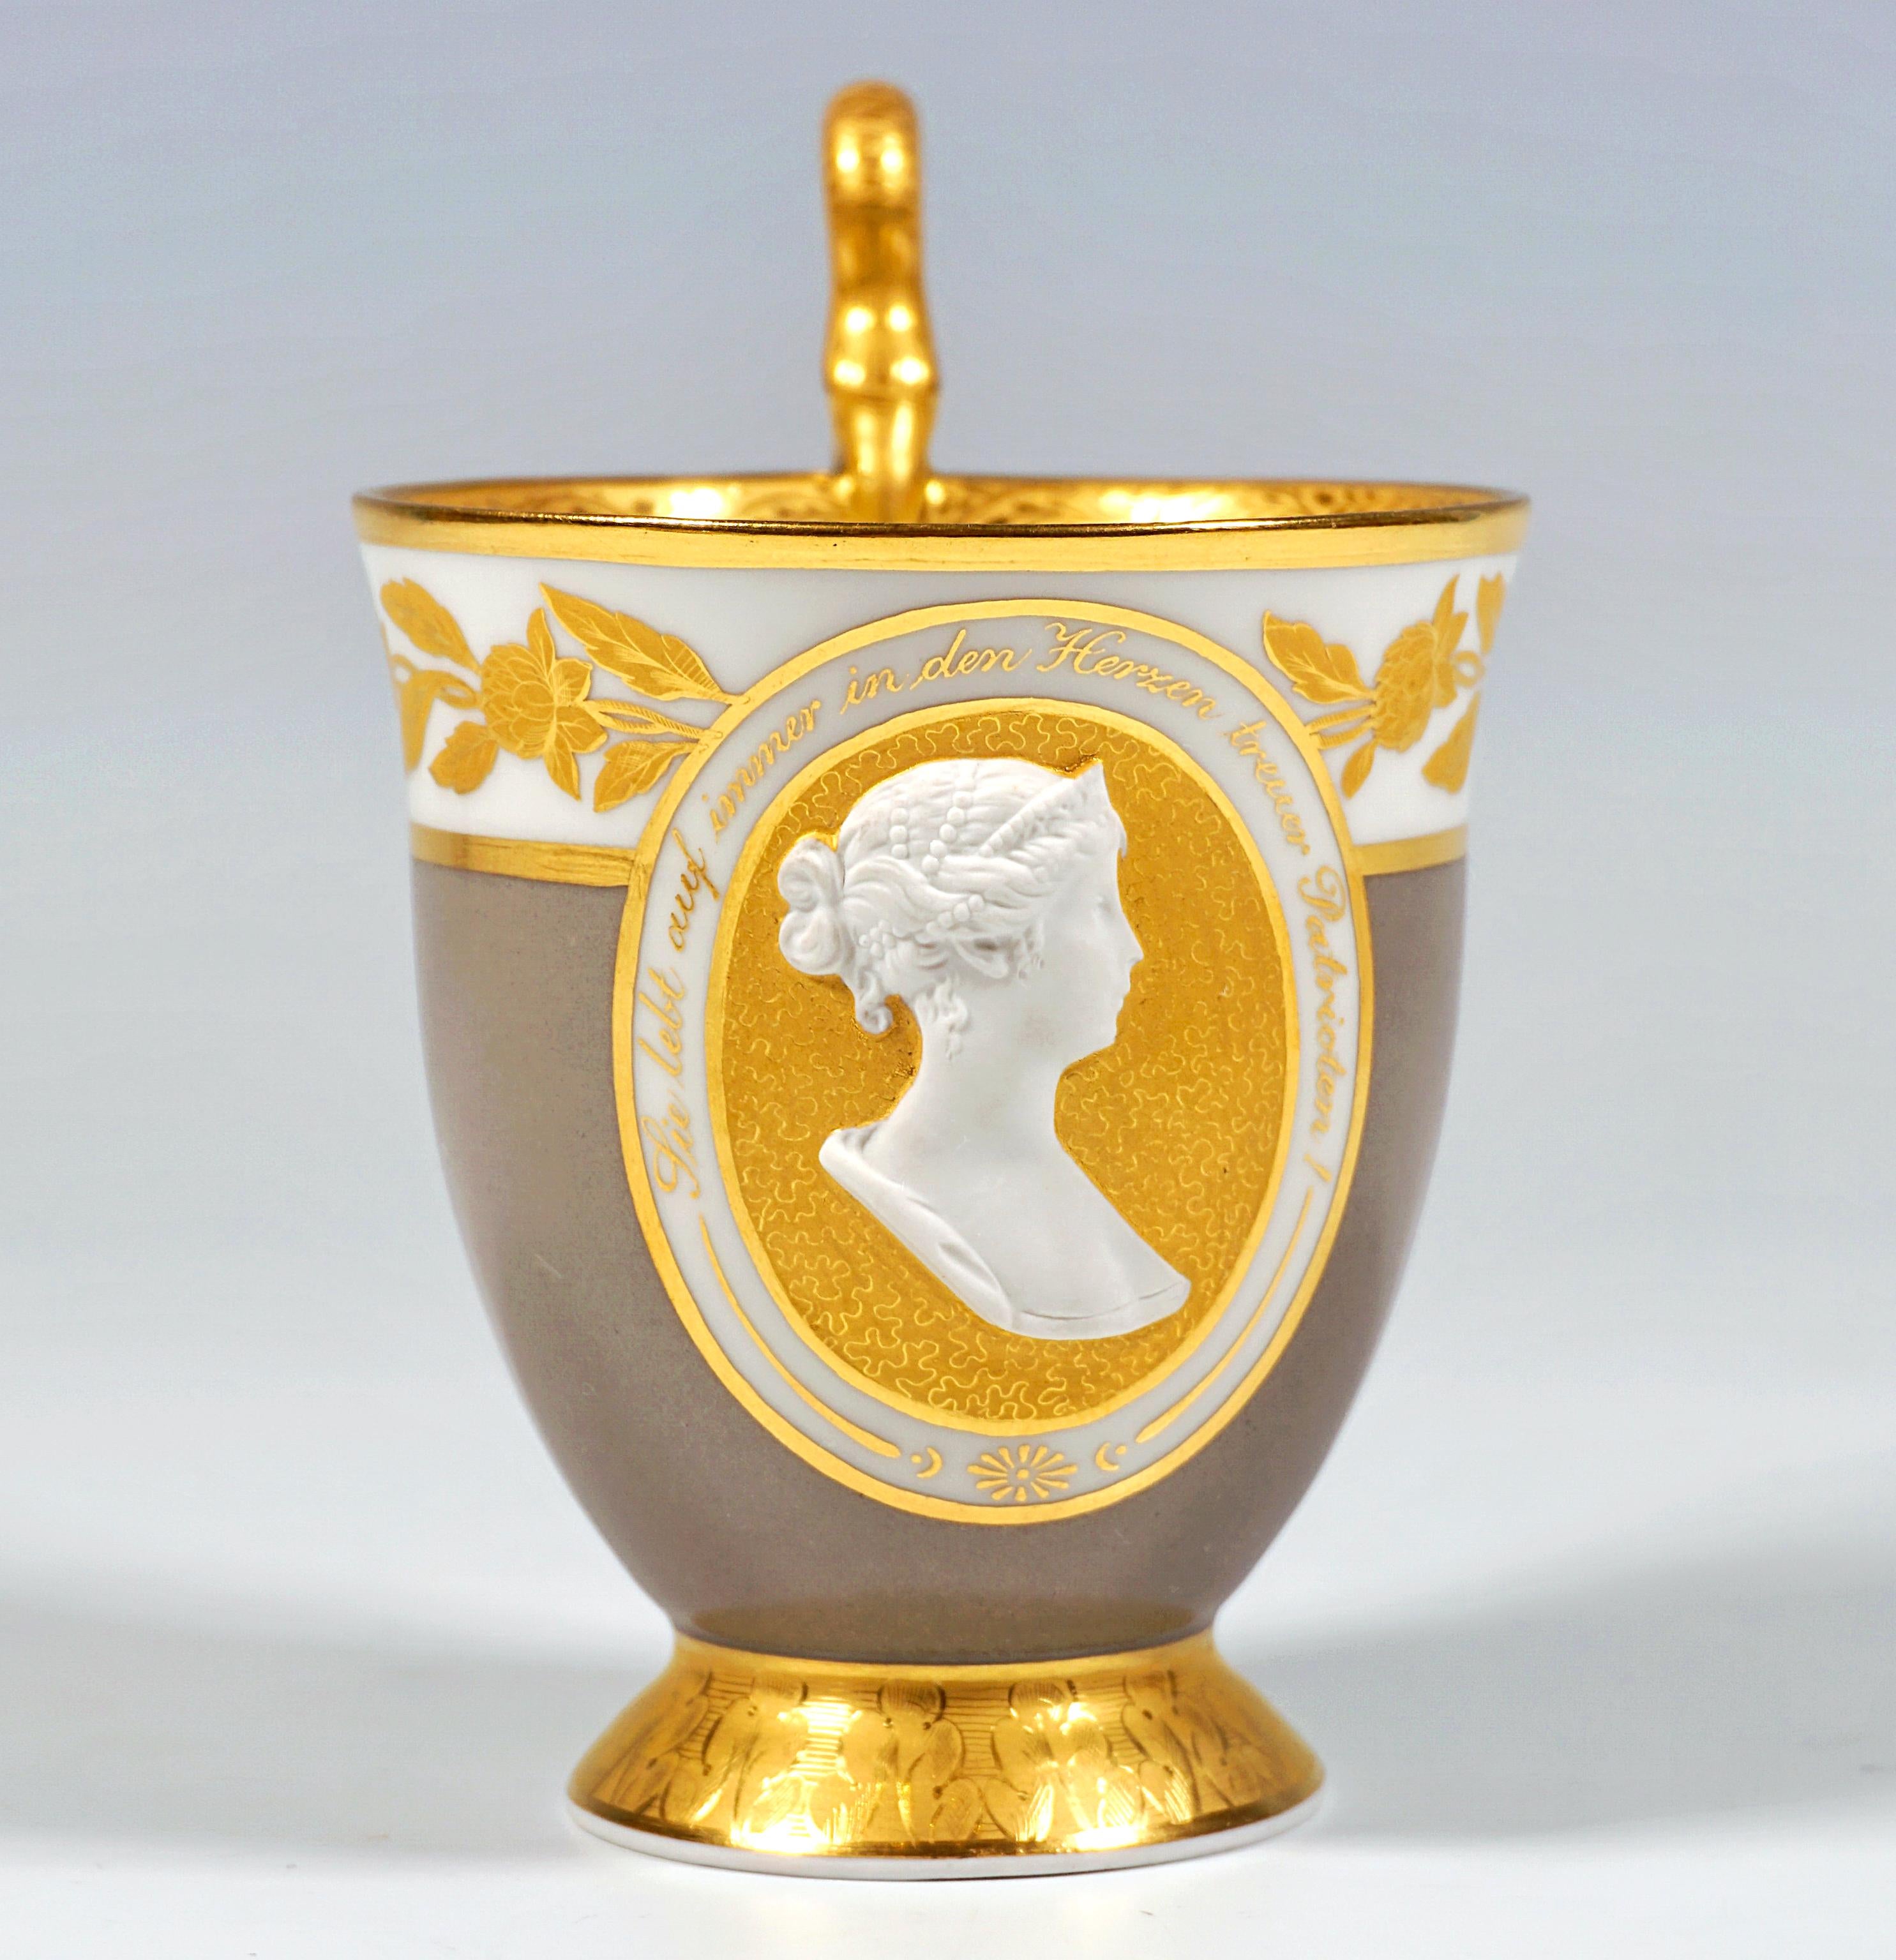 Neoclassical KPM Berlin Anniversary Collector's Cup, Queen Luise 1776-1926, Germany, Ca 1926